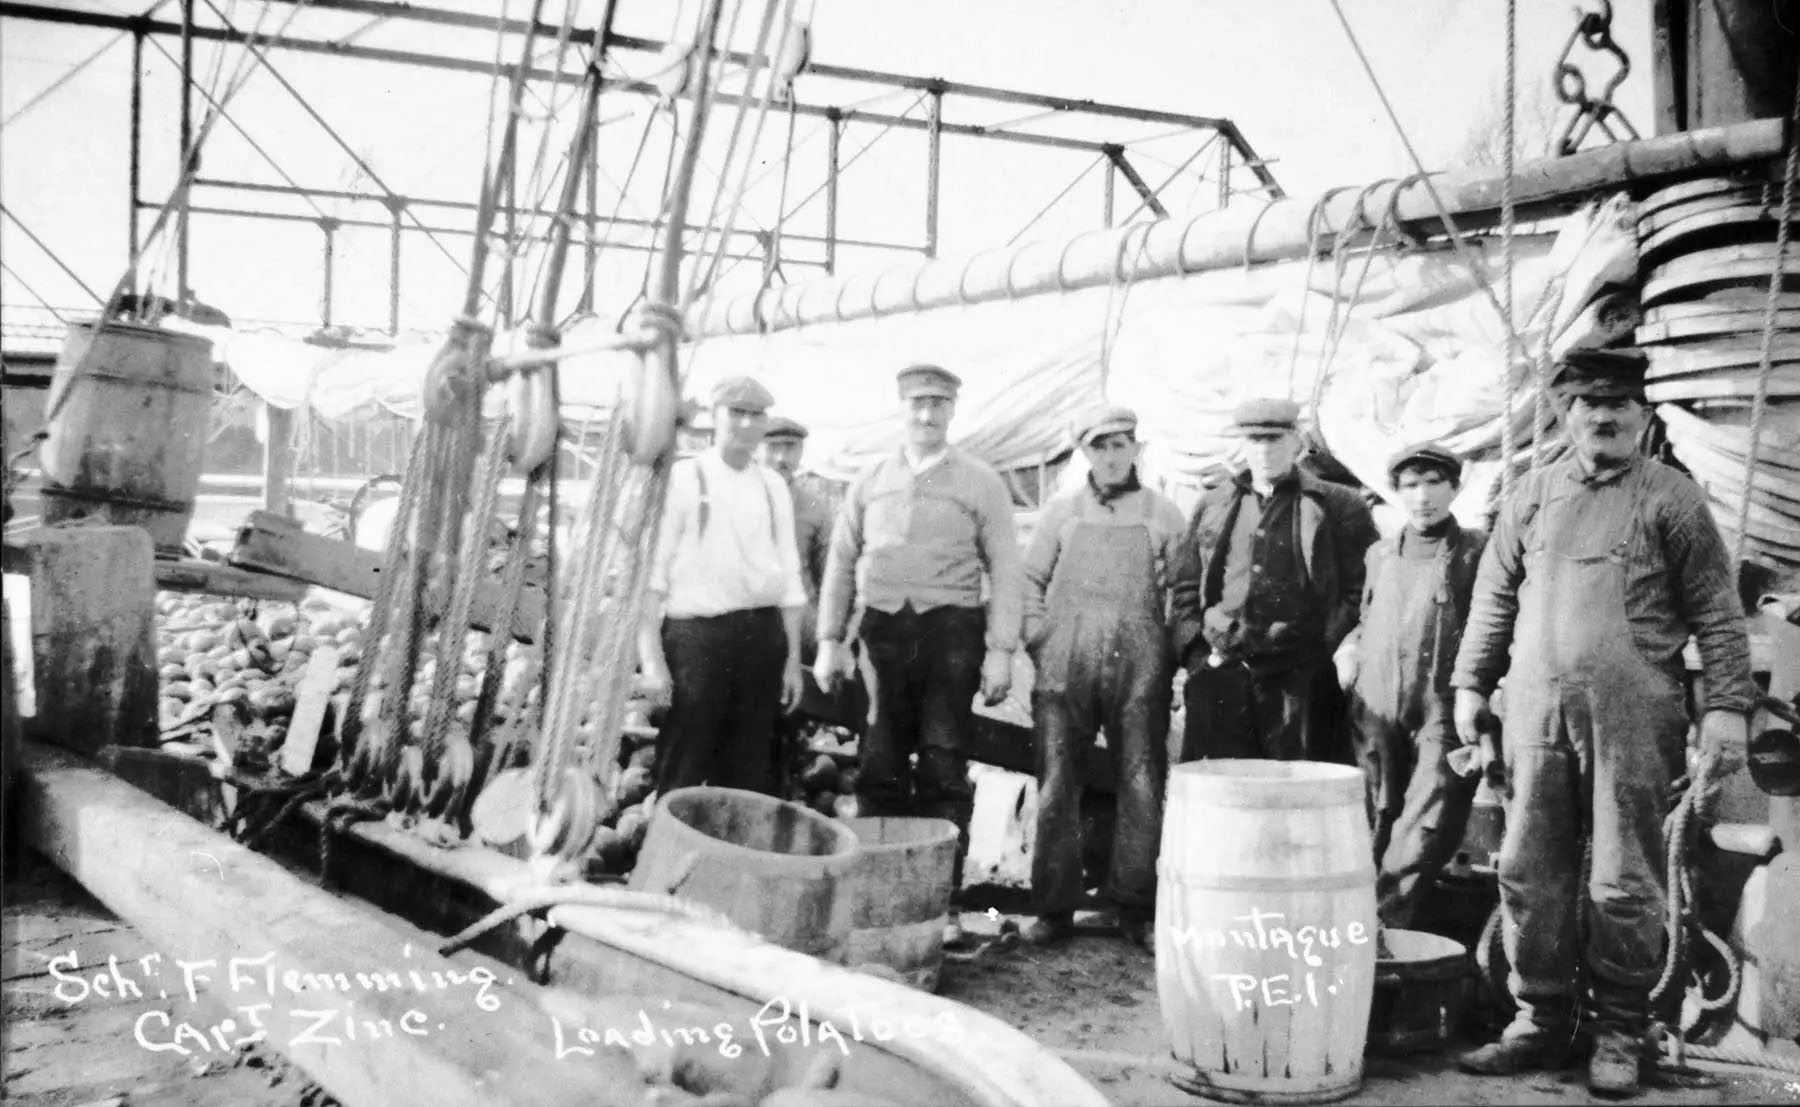 Seven men stand on the deck of a docked schooner, sails furled, with heaps of potatoes and some barrels visible.